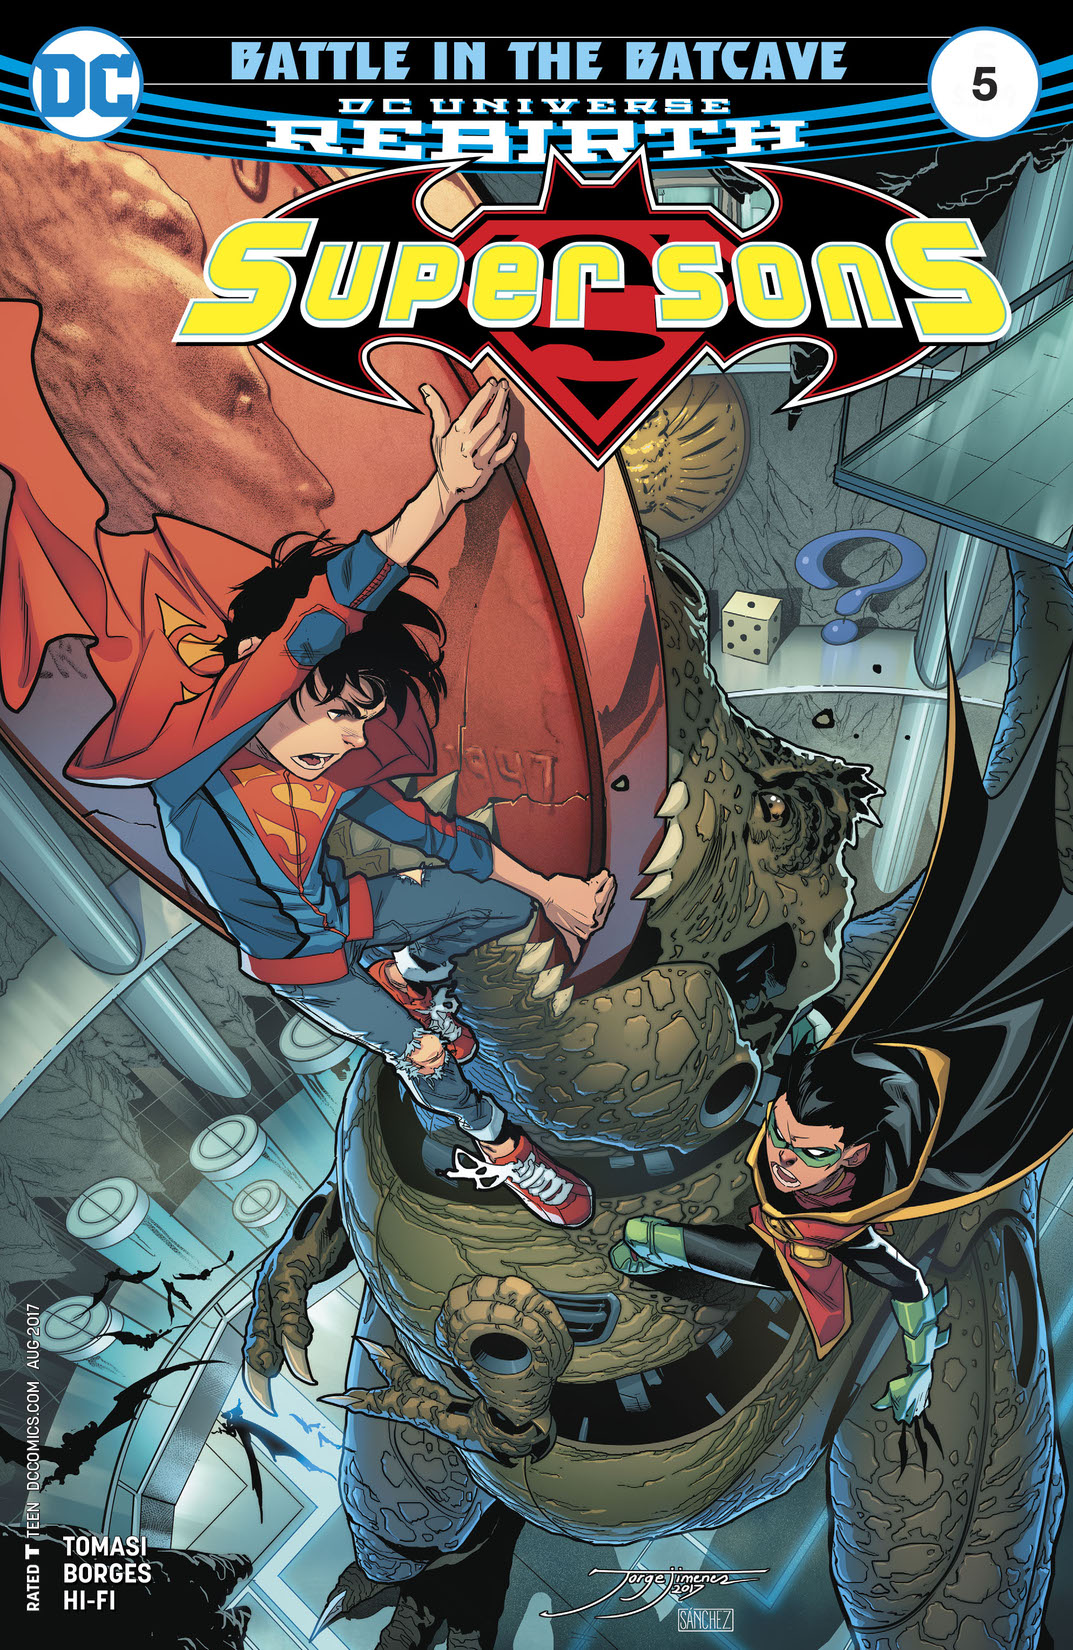 Super Sons (2017-) #5 preview images